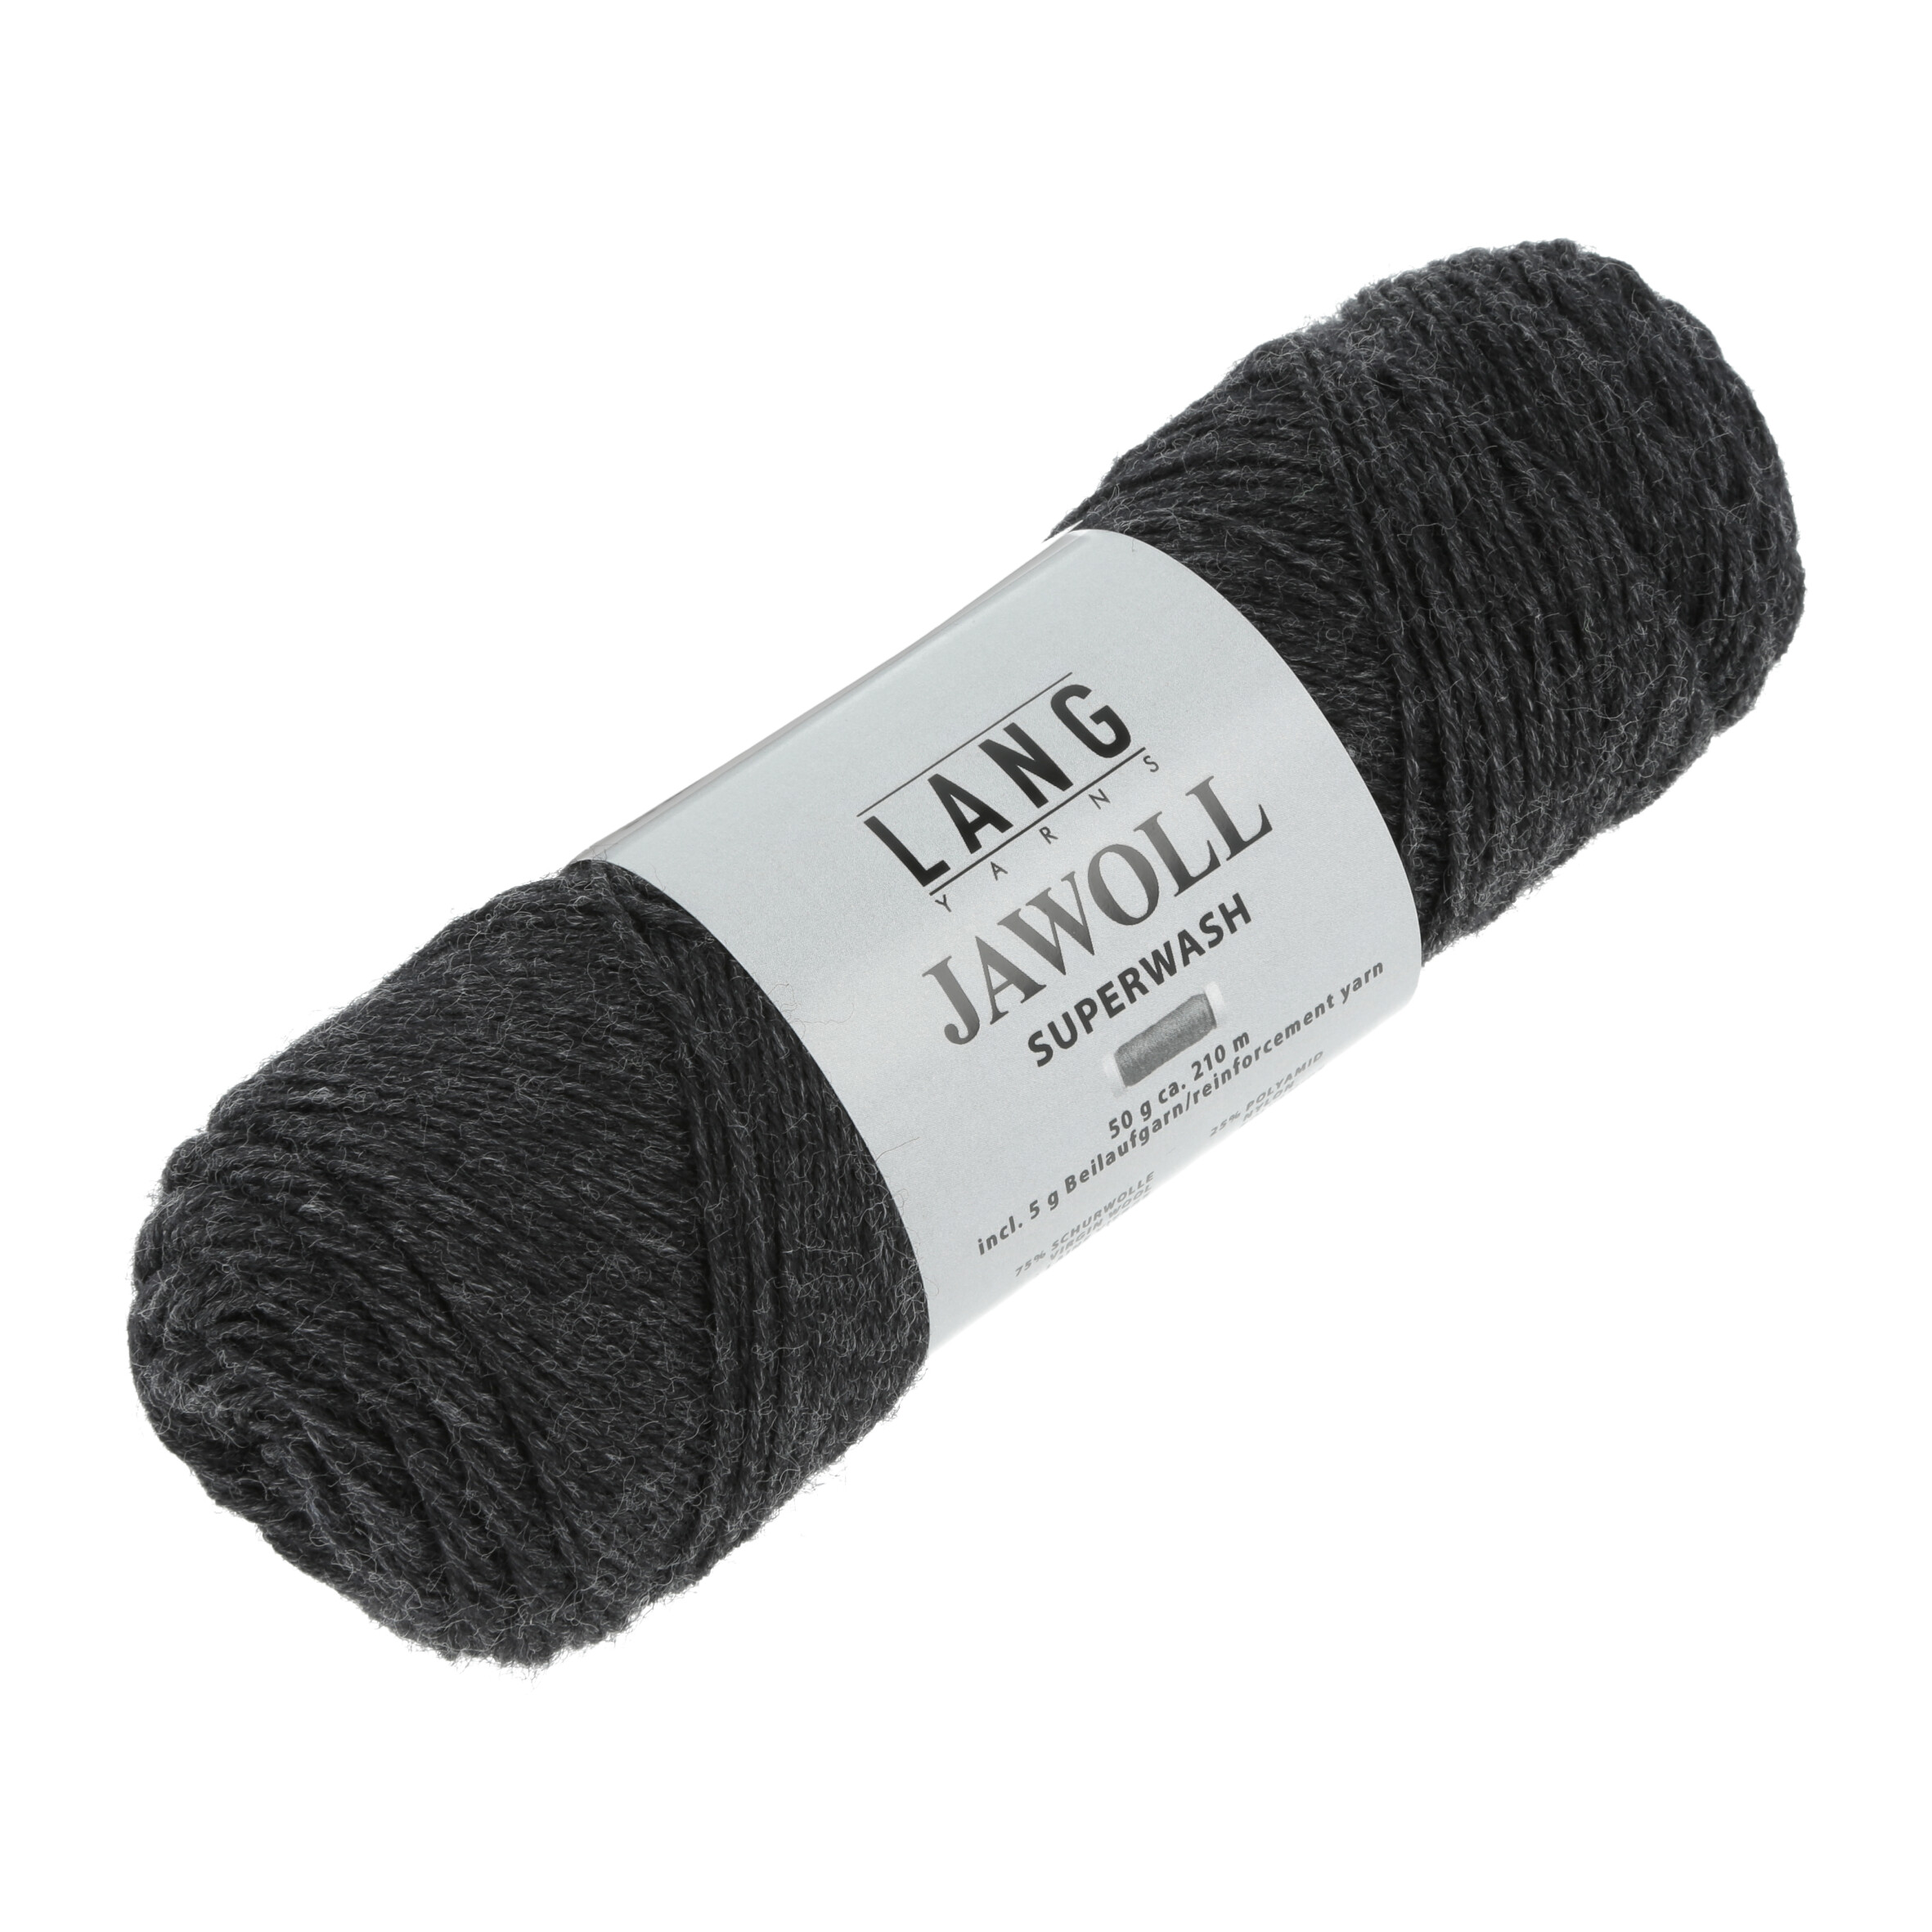 LANG JAWOLL 50GR 0070 ANTRACITE